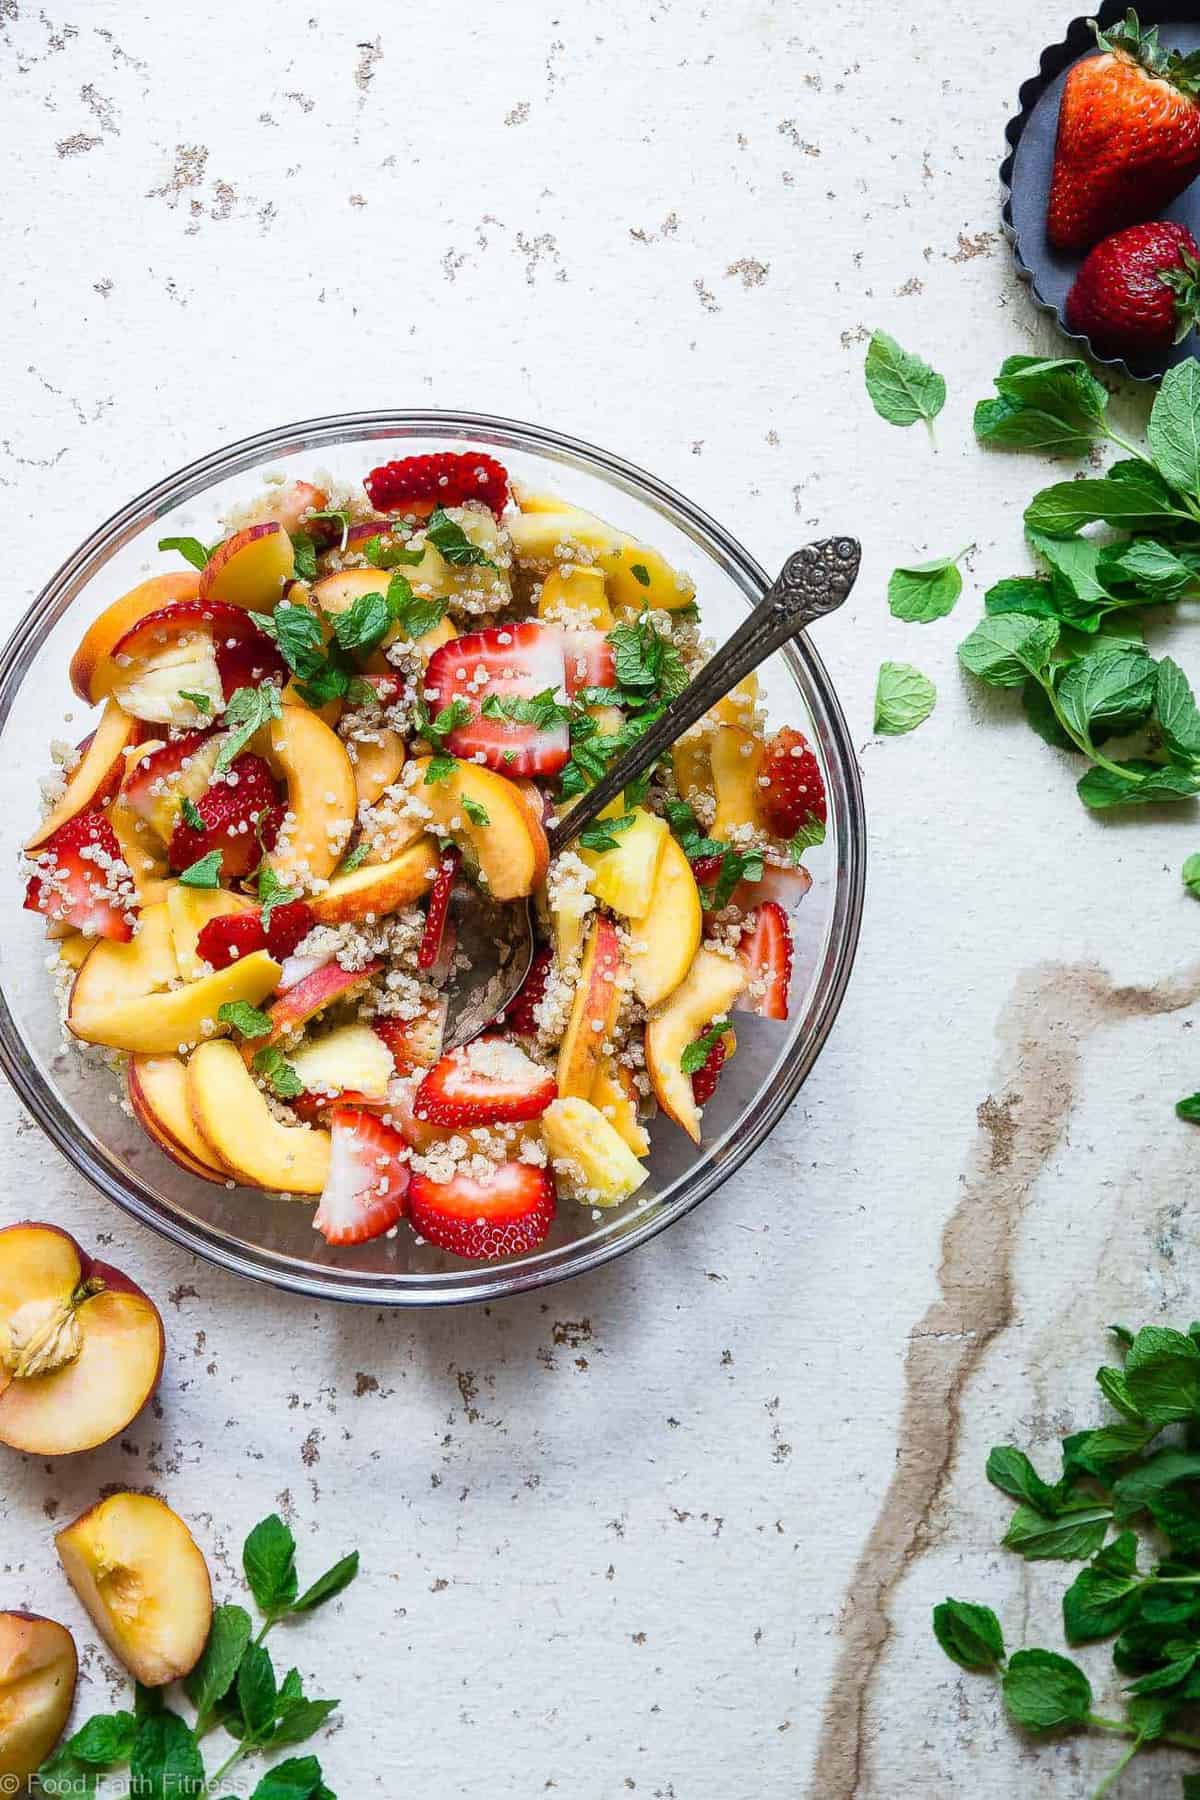 Honey Lime Quinoa Fruit Salad - This honey lime Coconut Milk Quinoa Fruit Salad is loaded with fresh, juicy fruit and a sweet and tangy dressing! The perfect healthy, gluten free and vegan side dish or brunch item for Summer! | #Foodfaithfitness | #Glutenfree #Vegan #Healthy #Dairyfree #Quinoa